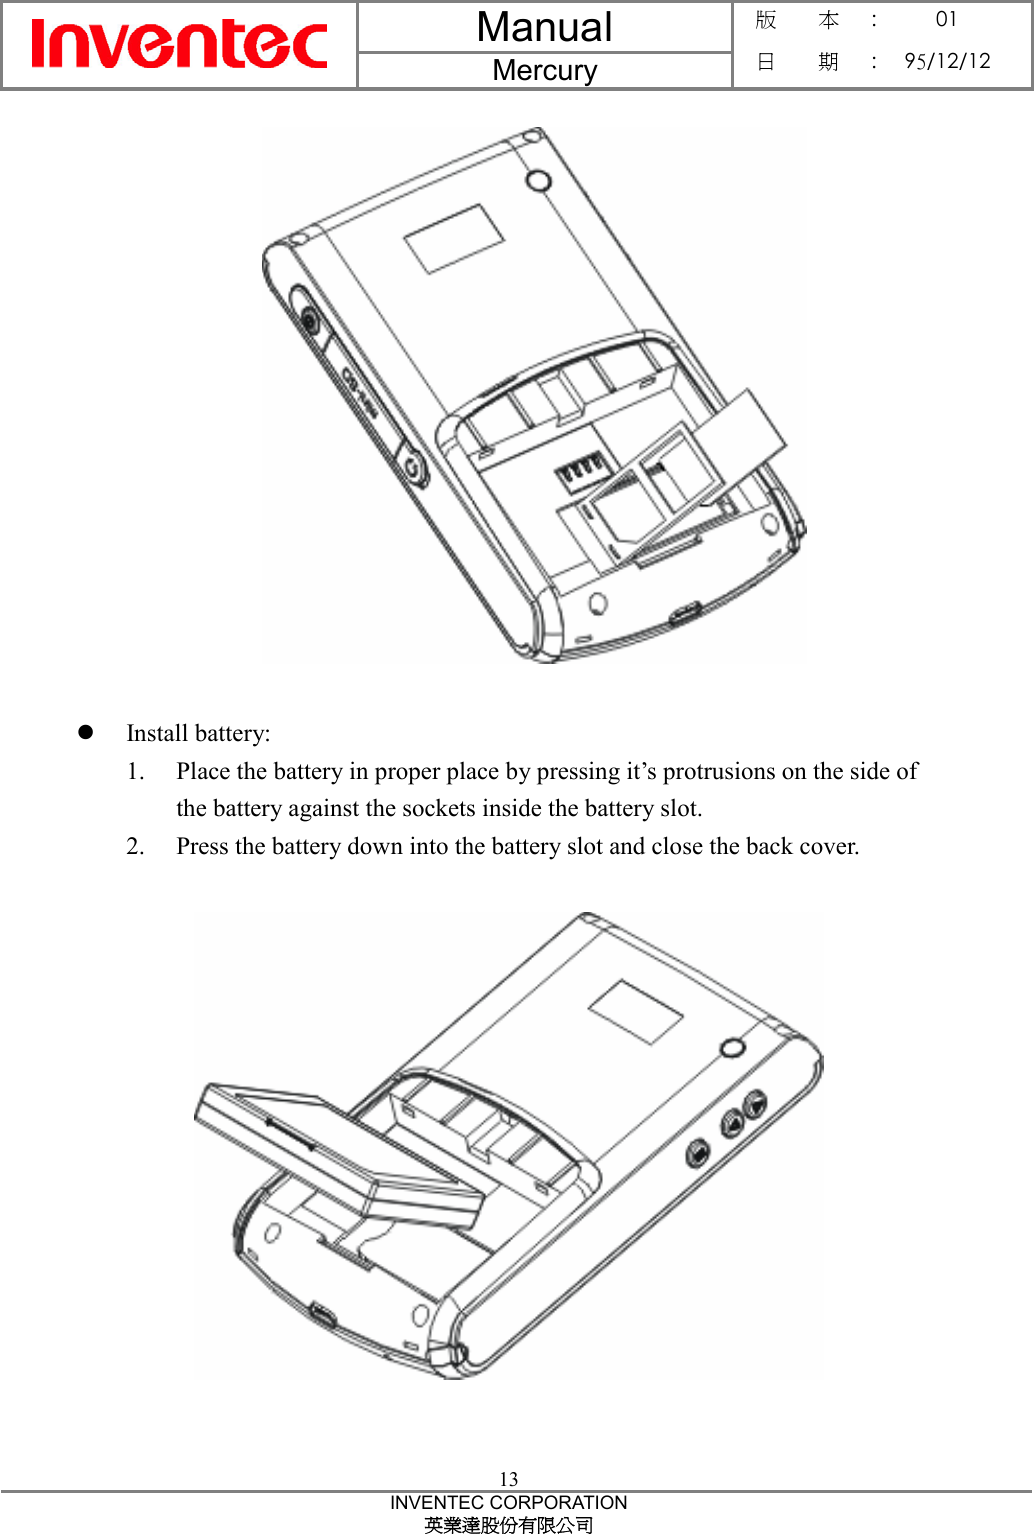 Manual  Mercury 版    本 :  01 日    期 : 95/12/12  13 INVENTEC CORPORATION 英業達股份有限公司    z Install battery: 1. Place the battery in proper place by pressing it’s protrusions on the side of the battery against the sockets inside the battery slot. 2. Press the battery down into the battery slot and close the back cover.     